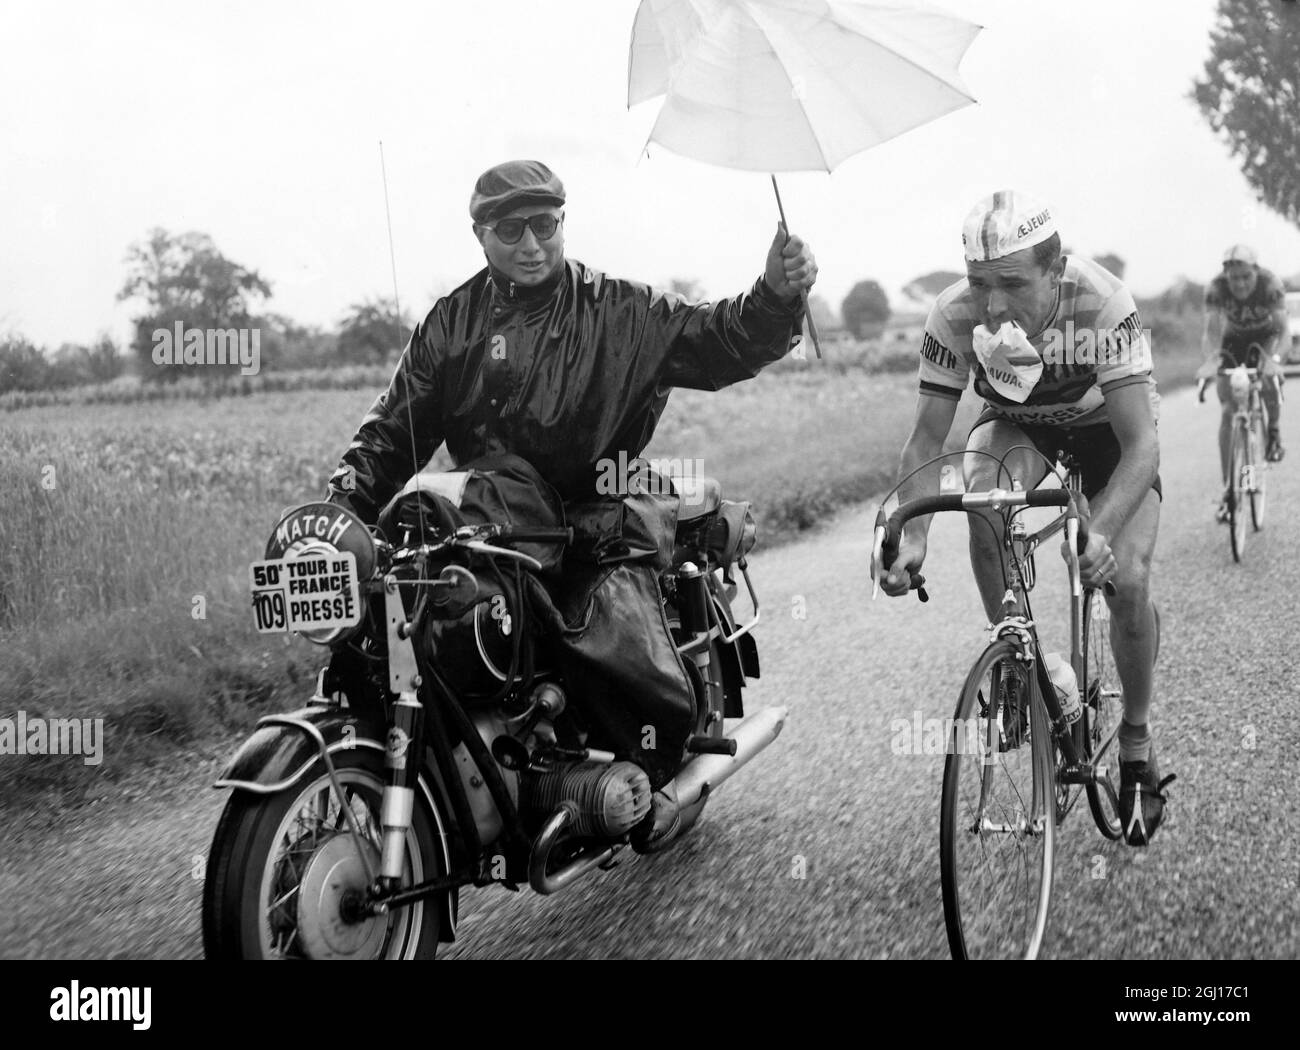 2 JULY 1963 FRENCH CYCLIST HENRI ANGLADE WITH A SUPPORT RIDER ATTEMPTING TO KEEP THE DRIVING RAIN OFF WITH AN UMBRELLA DURING A STAGE OF THE TOUR DE FRANCE IN BORDEAUX, FRANCE. Stock Photo